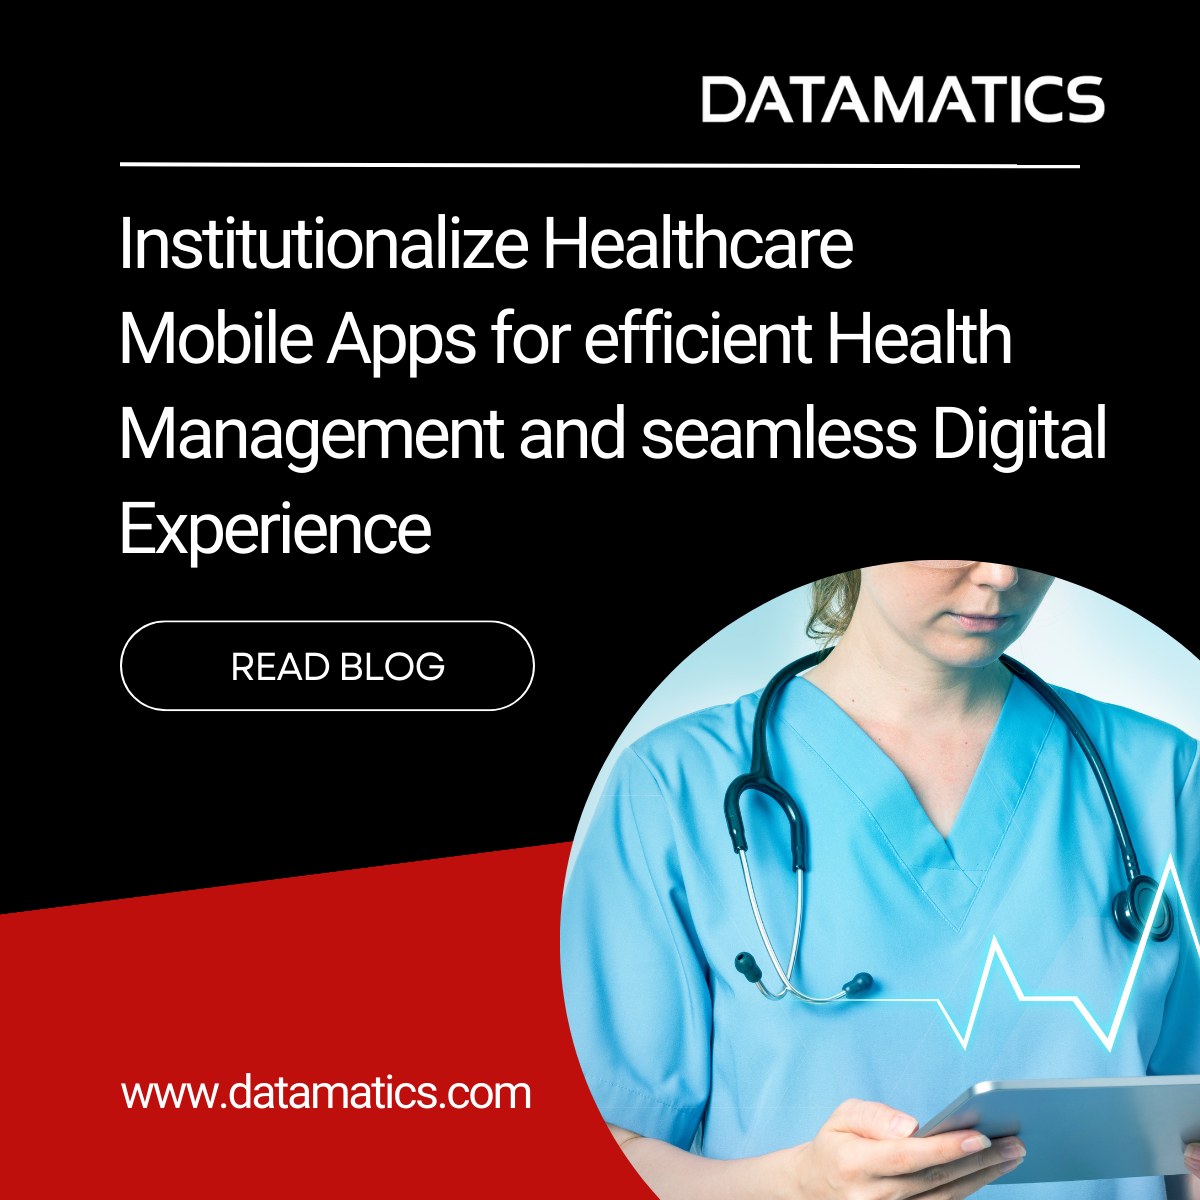 Institutionalize Healthcare Mobile Apps for efficient Health Management and seamless Digital Experience